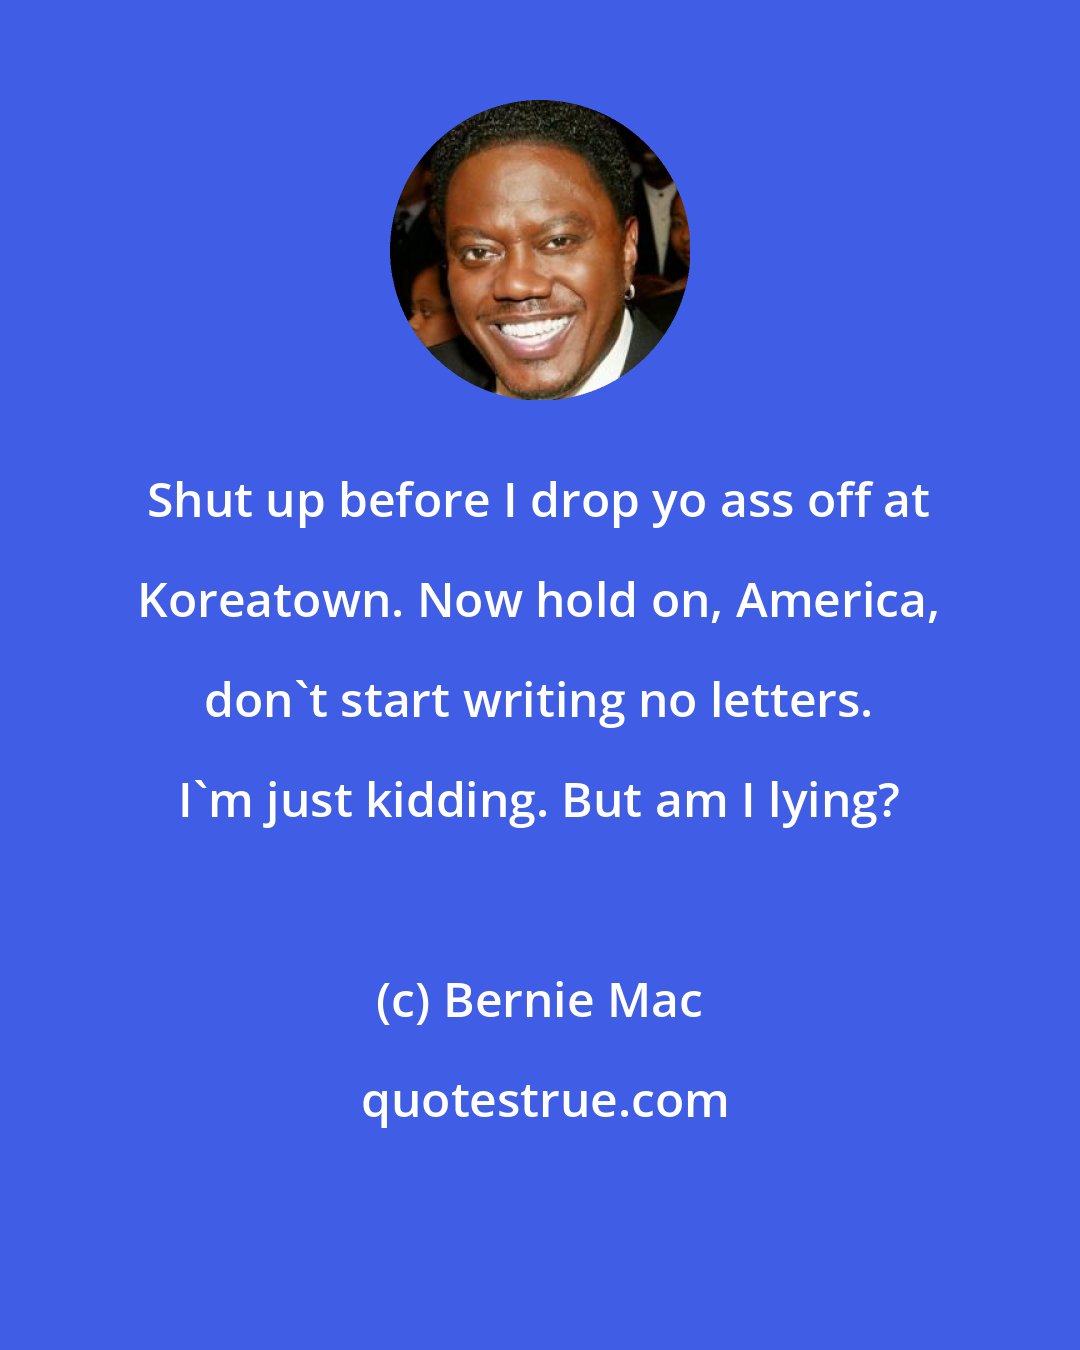 Bernie Mac: Shut up before I drop yo ass off at Koreatown. Now hold on, America, don't start writing no letters. I'm just kidding. But am I lying?